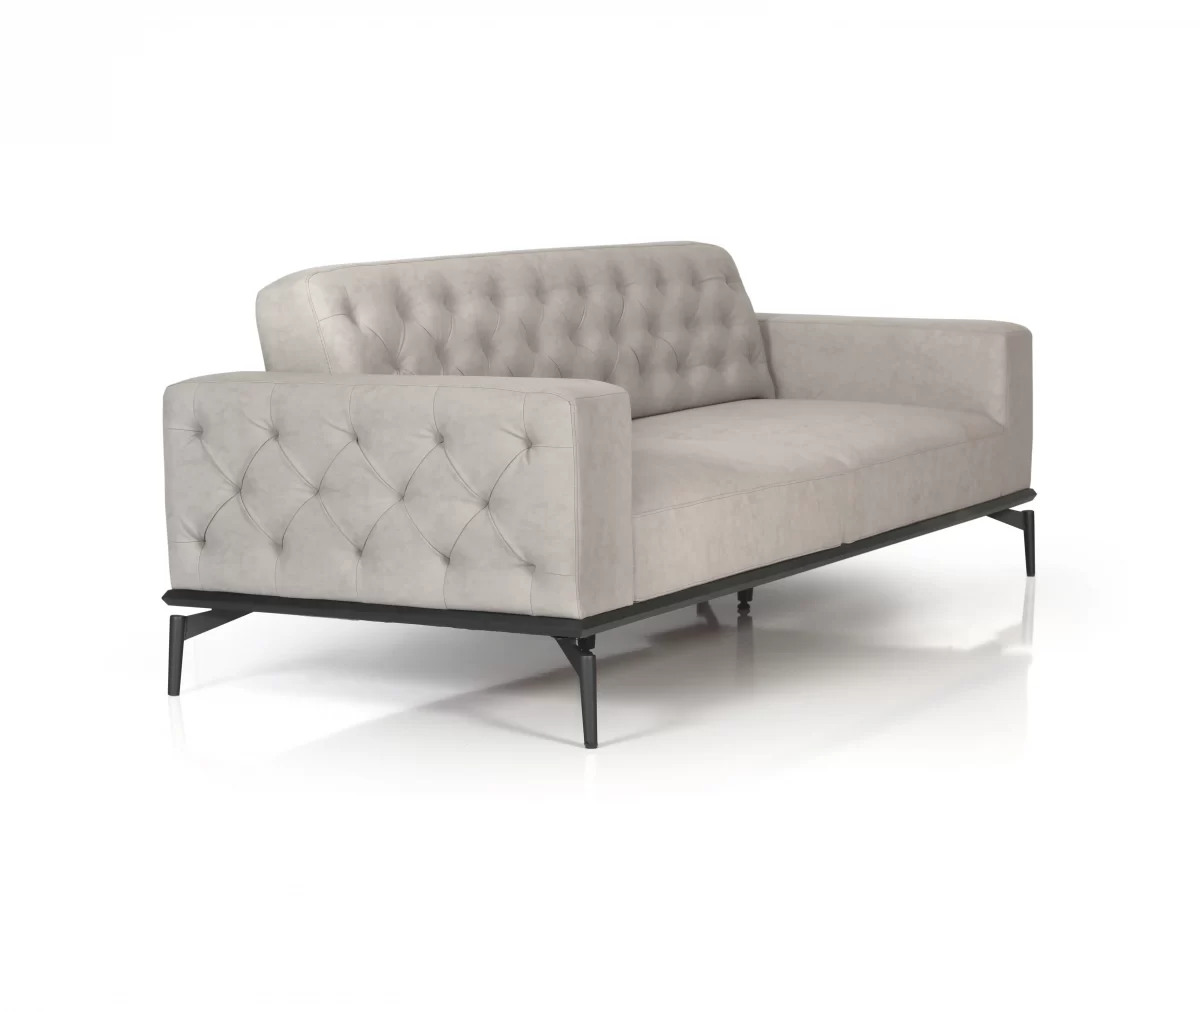 Manhattan Office Sofa Modern Chester Style Office Furniture scaled